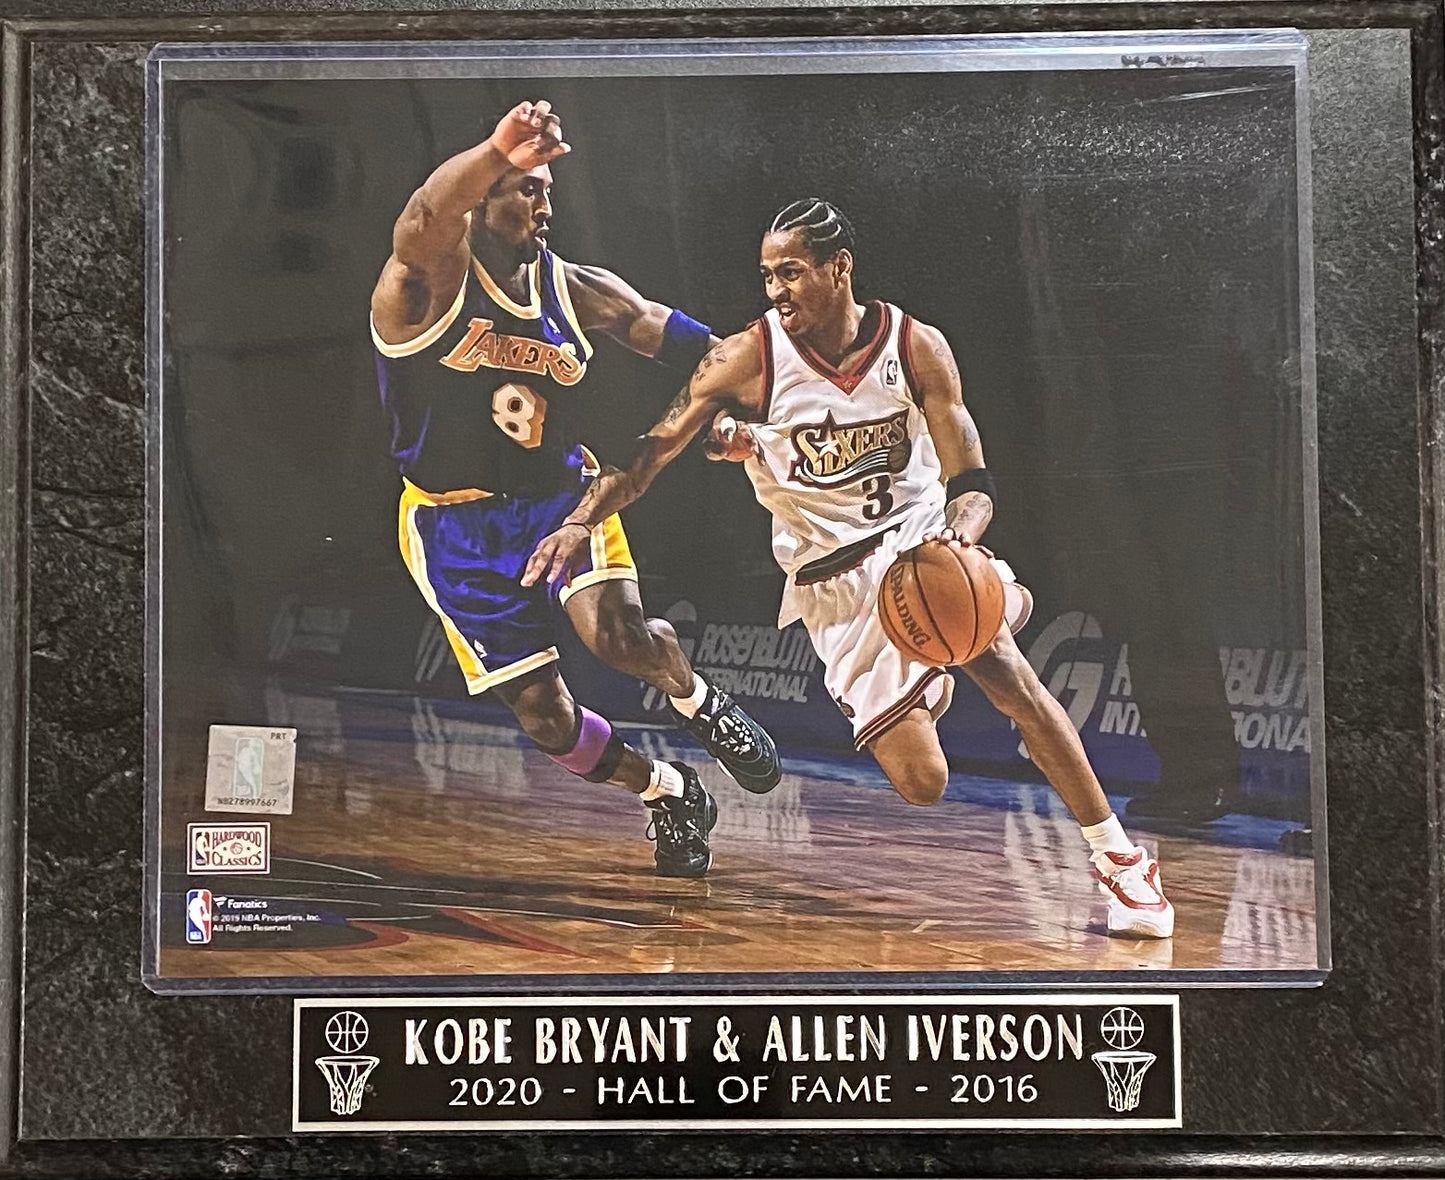 Kobe Bryant & Allen Iverson 2020-Hall of Fame-2016 Wall Plaque